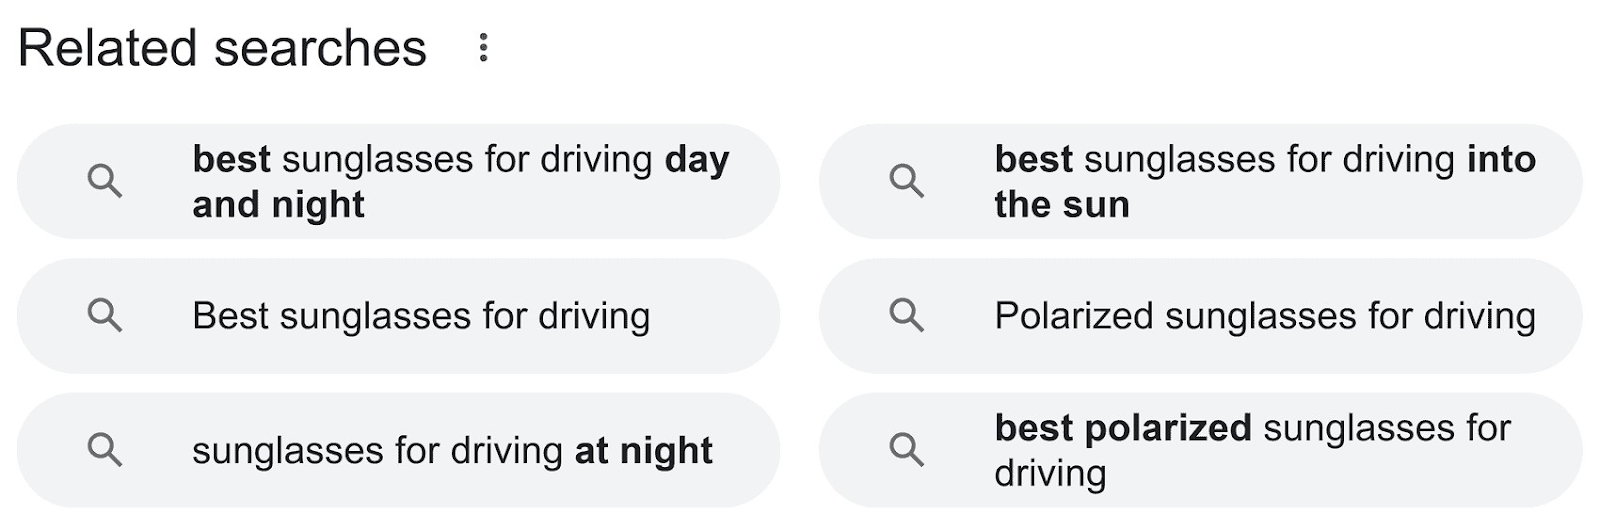 "Related searches" section on Google SERP for “sunglasses for driving”